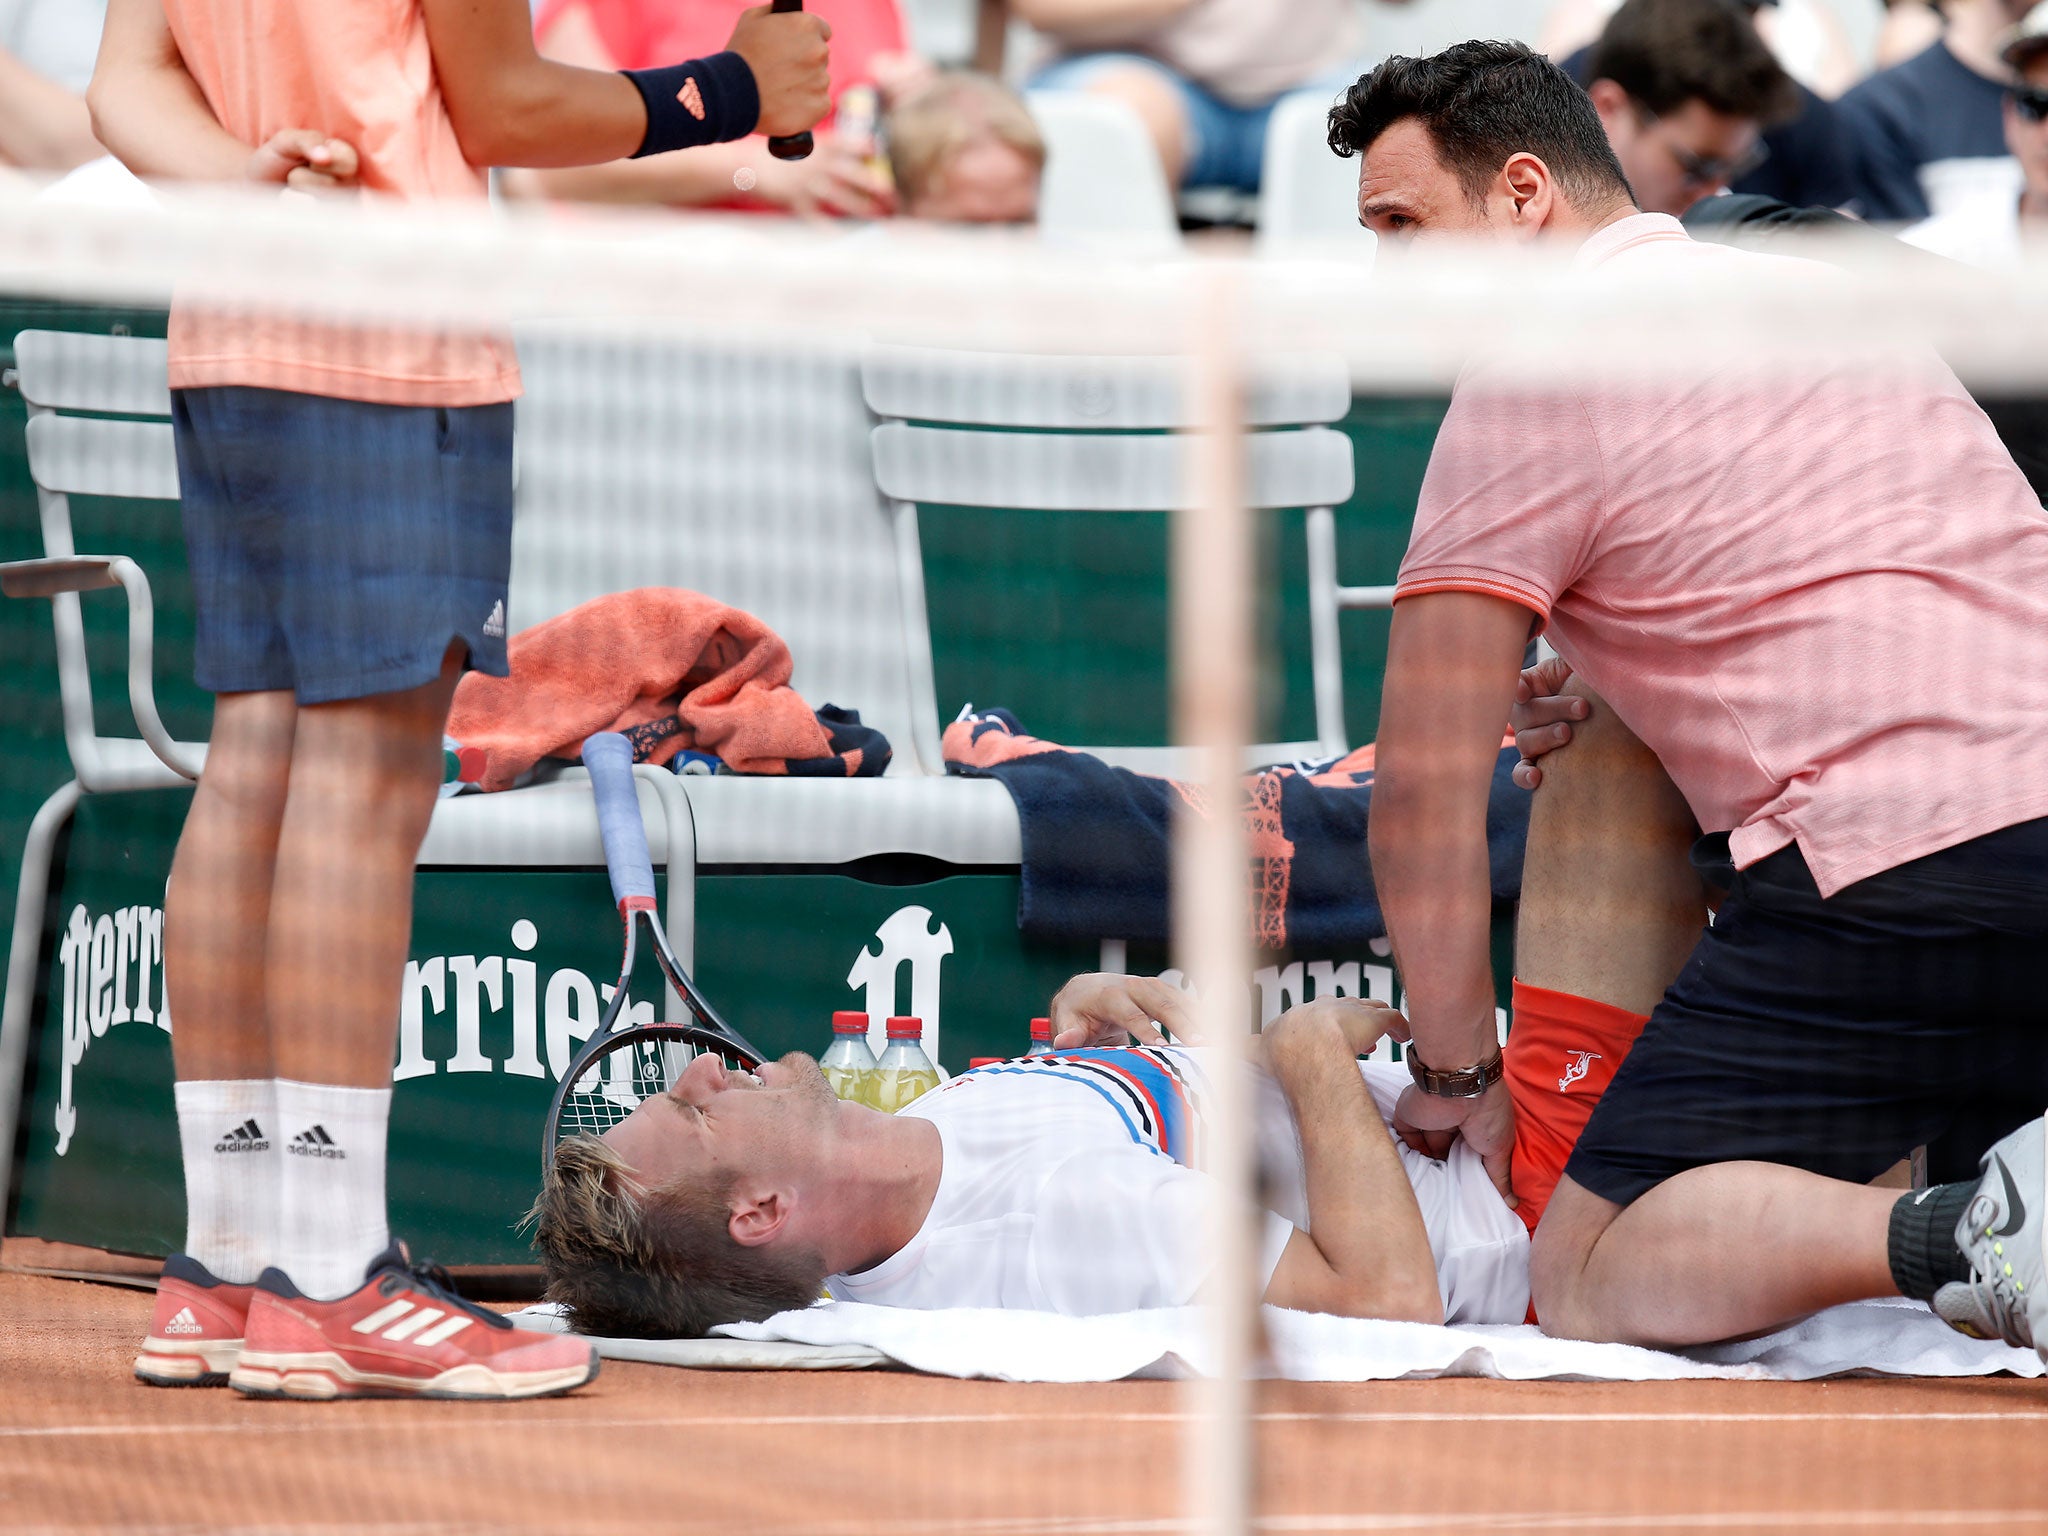 Gojowczyk receives medical assistance during the second set